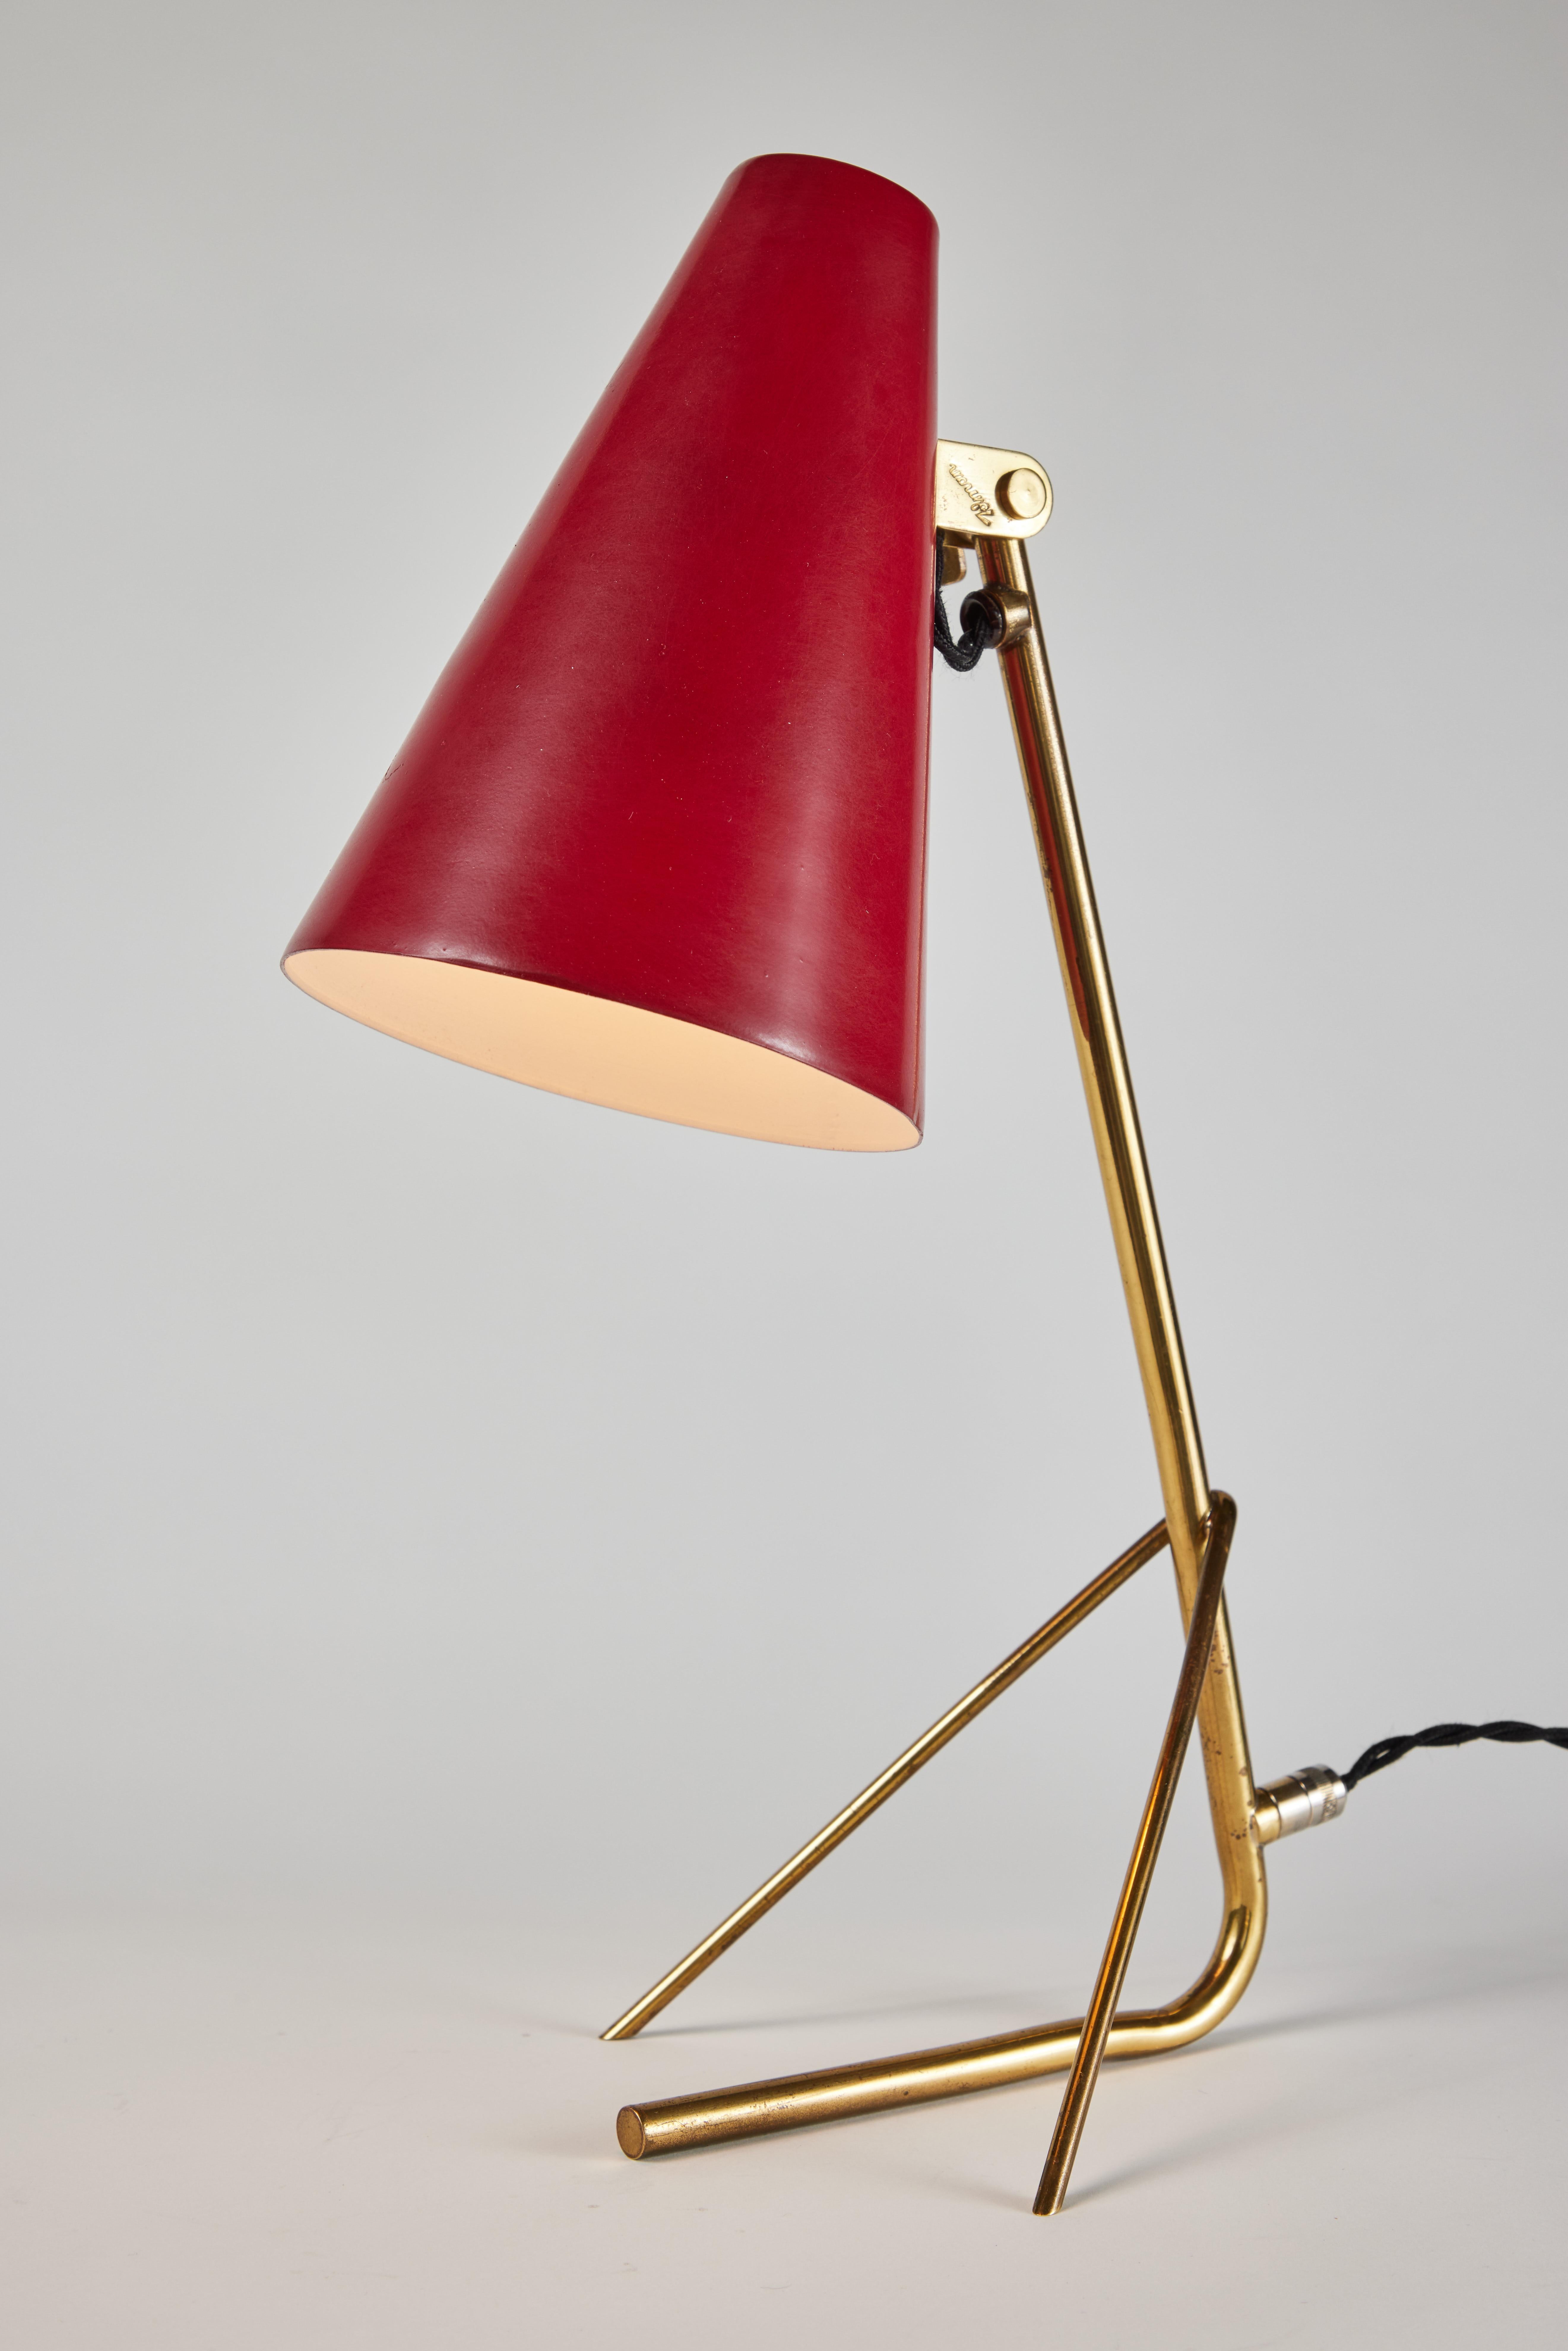 1950s Mauri Almari model K11-17 table lamp for Idman. A rare model executed in red enameled metal and brass. The shades can be raised and lowered. Reminiscent of Paavo Tynell's iconic designs for Taito Oy. An incredibly refined table lamp that is